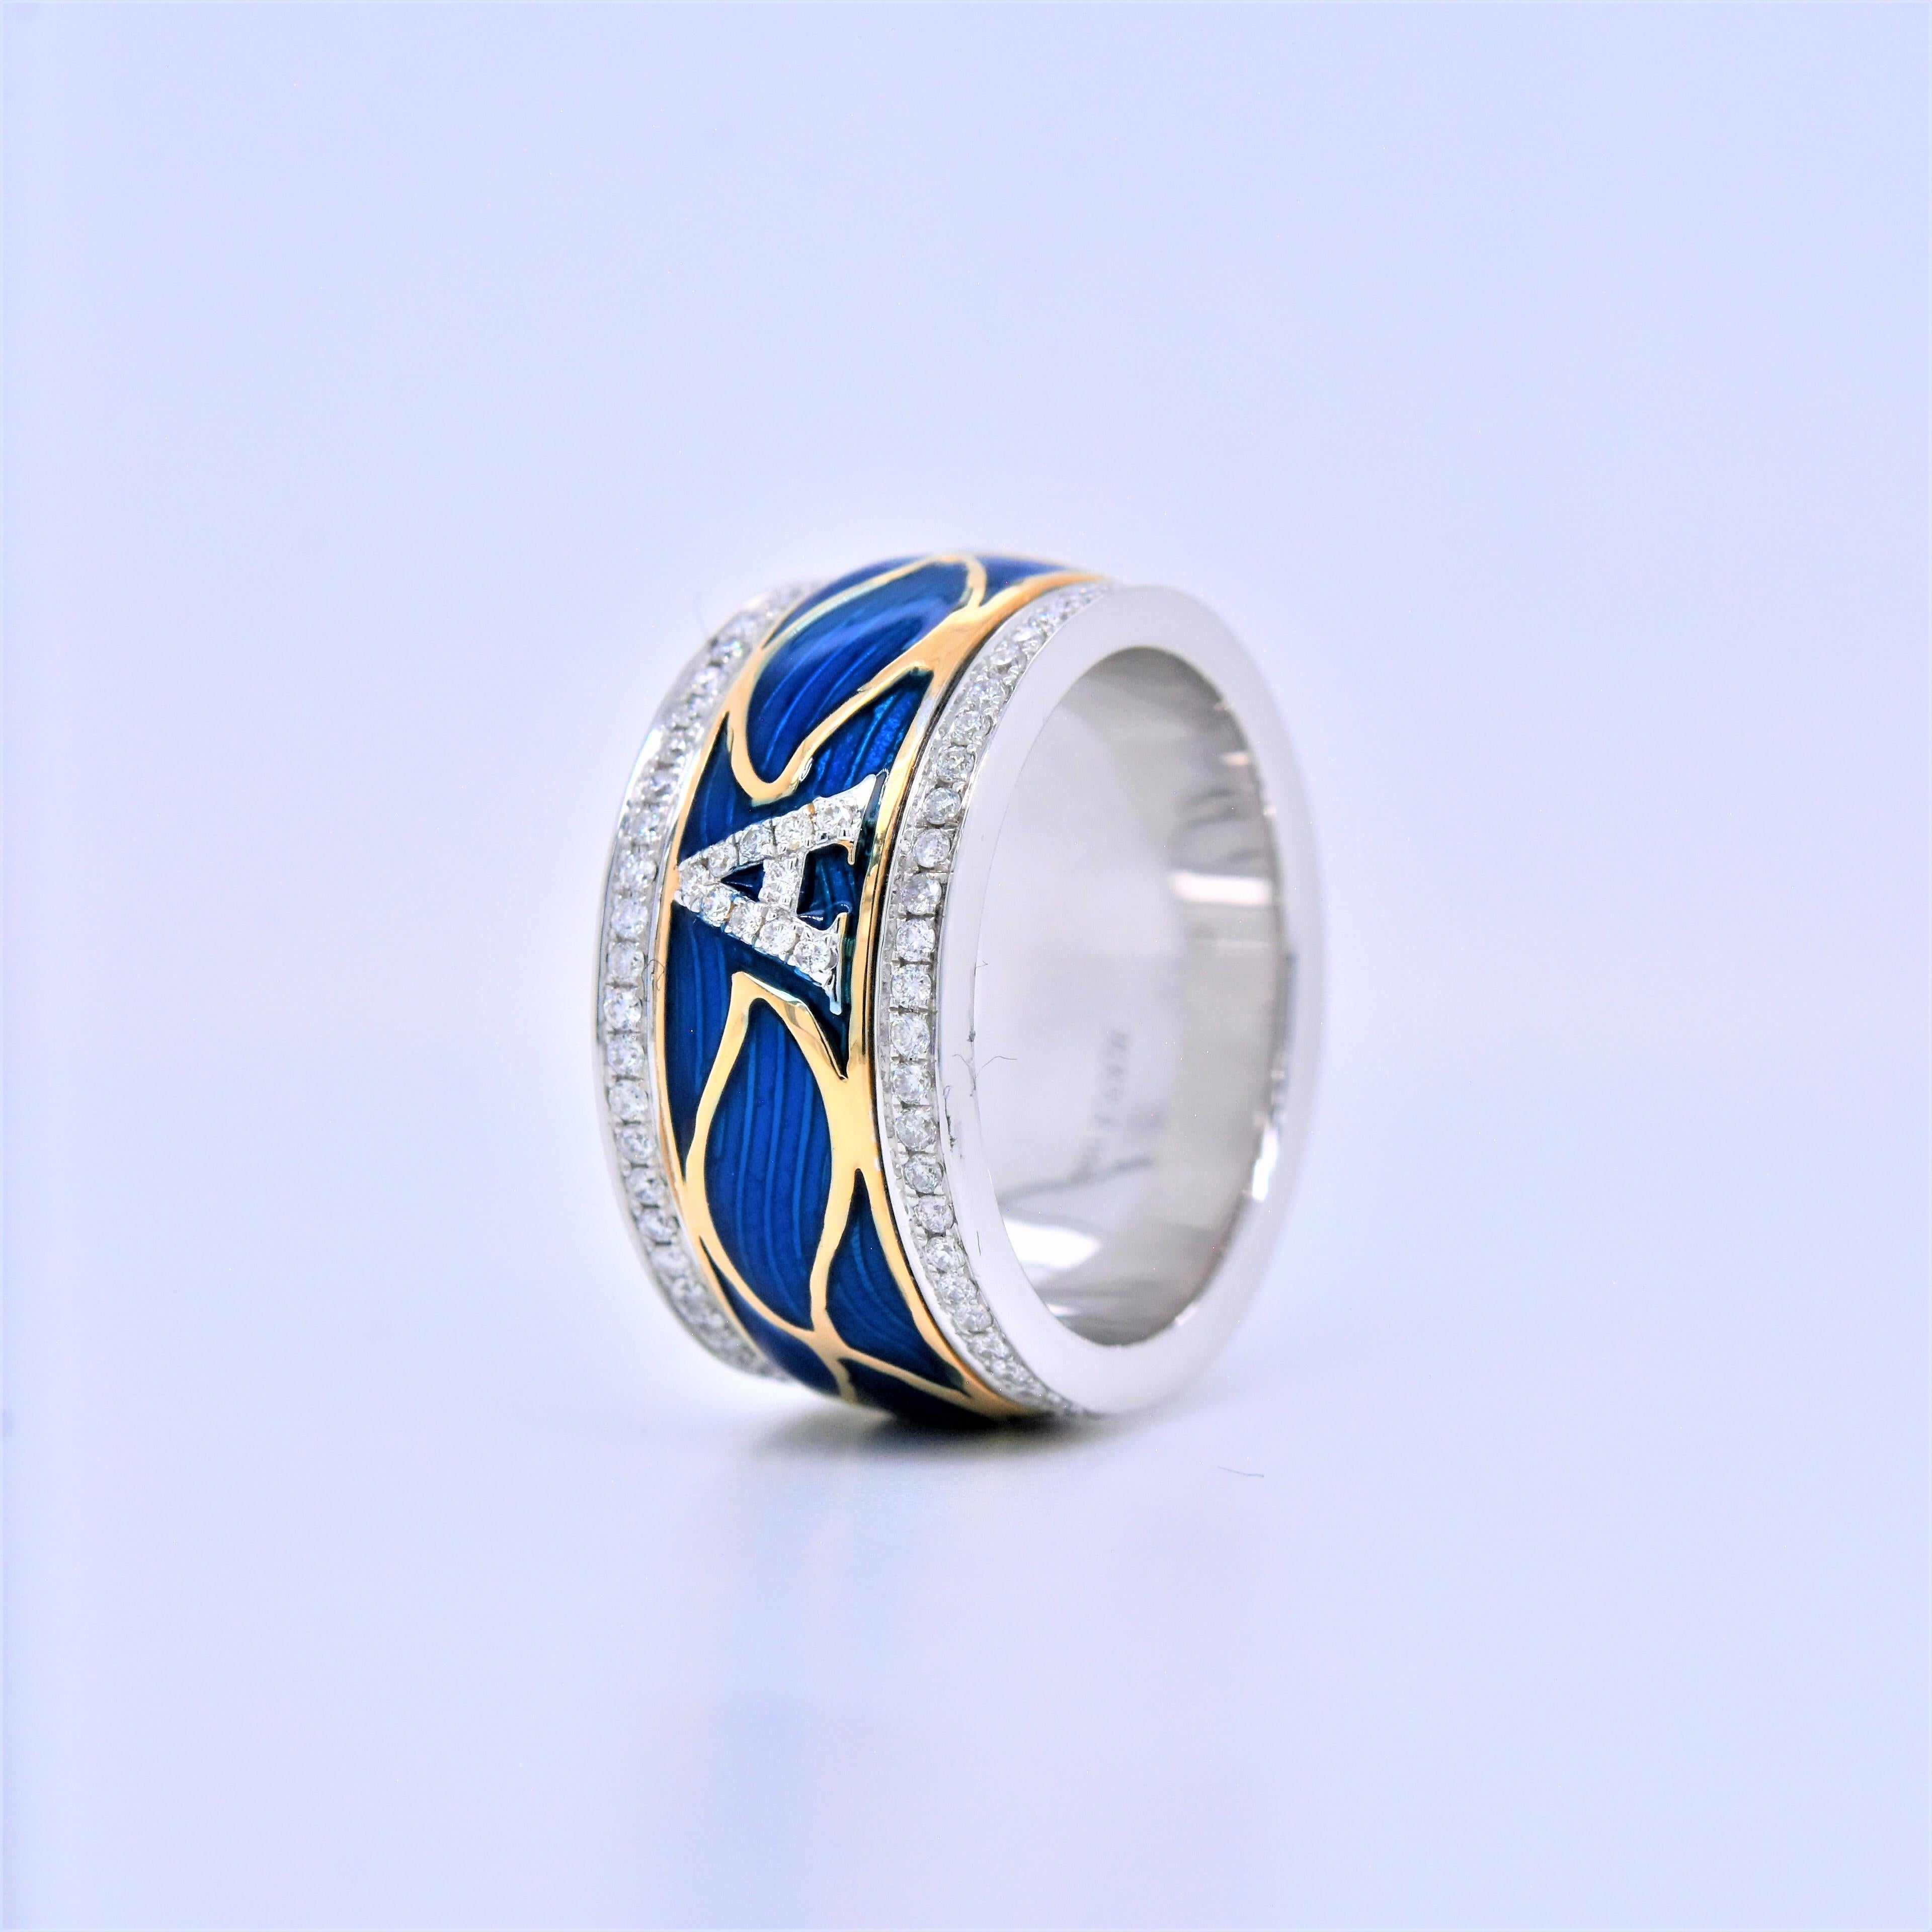 Trendy 18k White Gold Band with Blue Waves of Enamel and  Yellow Gold Detailing 
Total Carat Weight: 0.61 Carat
White Diamonds: 0.61 Carats (total 122 stones)
Metal: 15.95 grams, 18k White Gold 